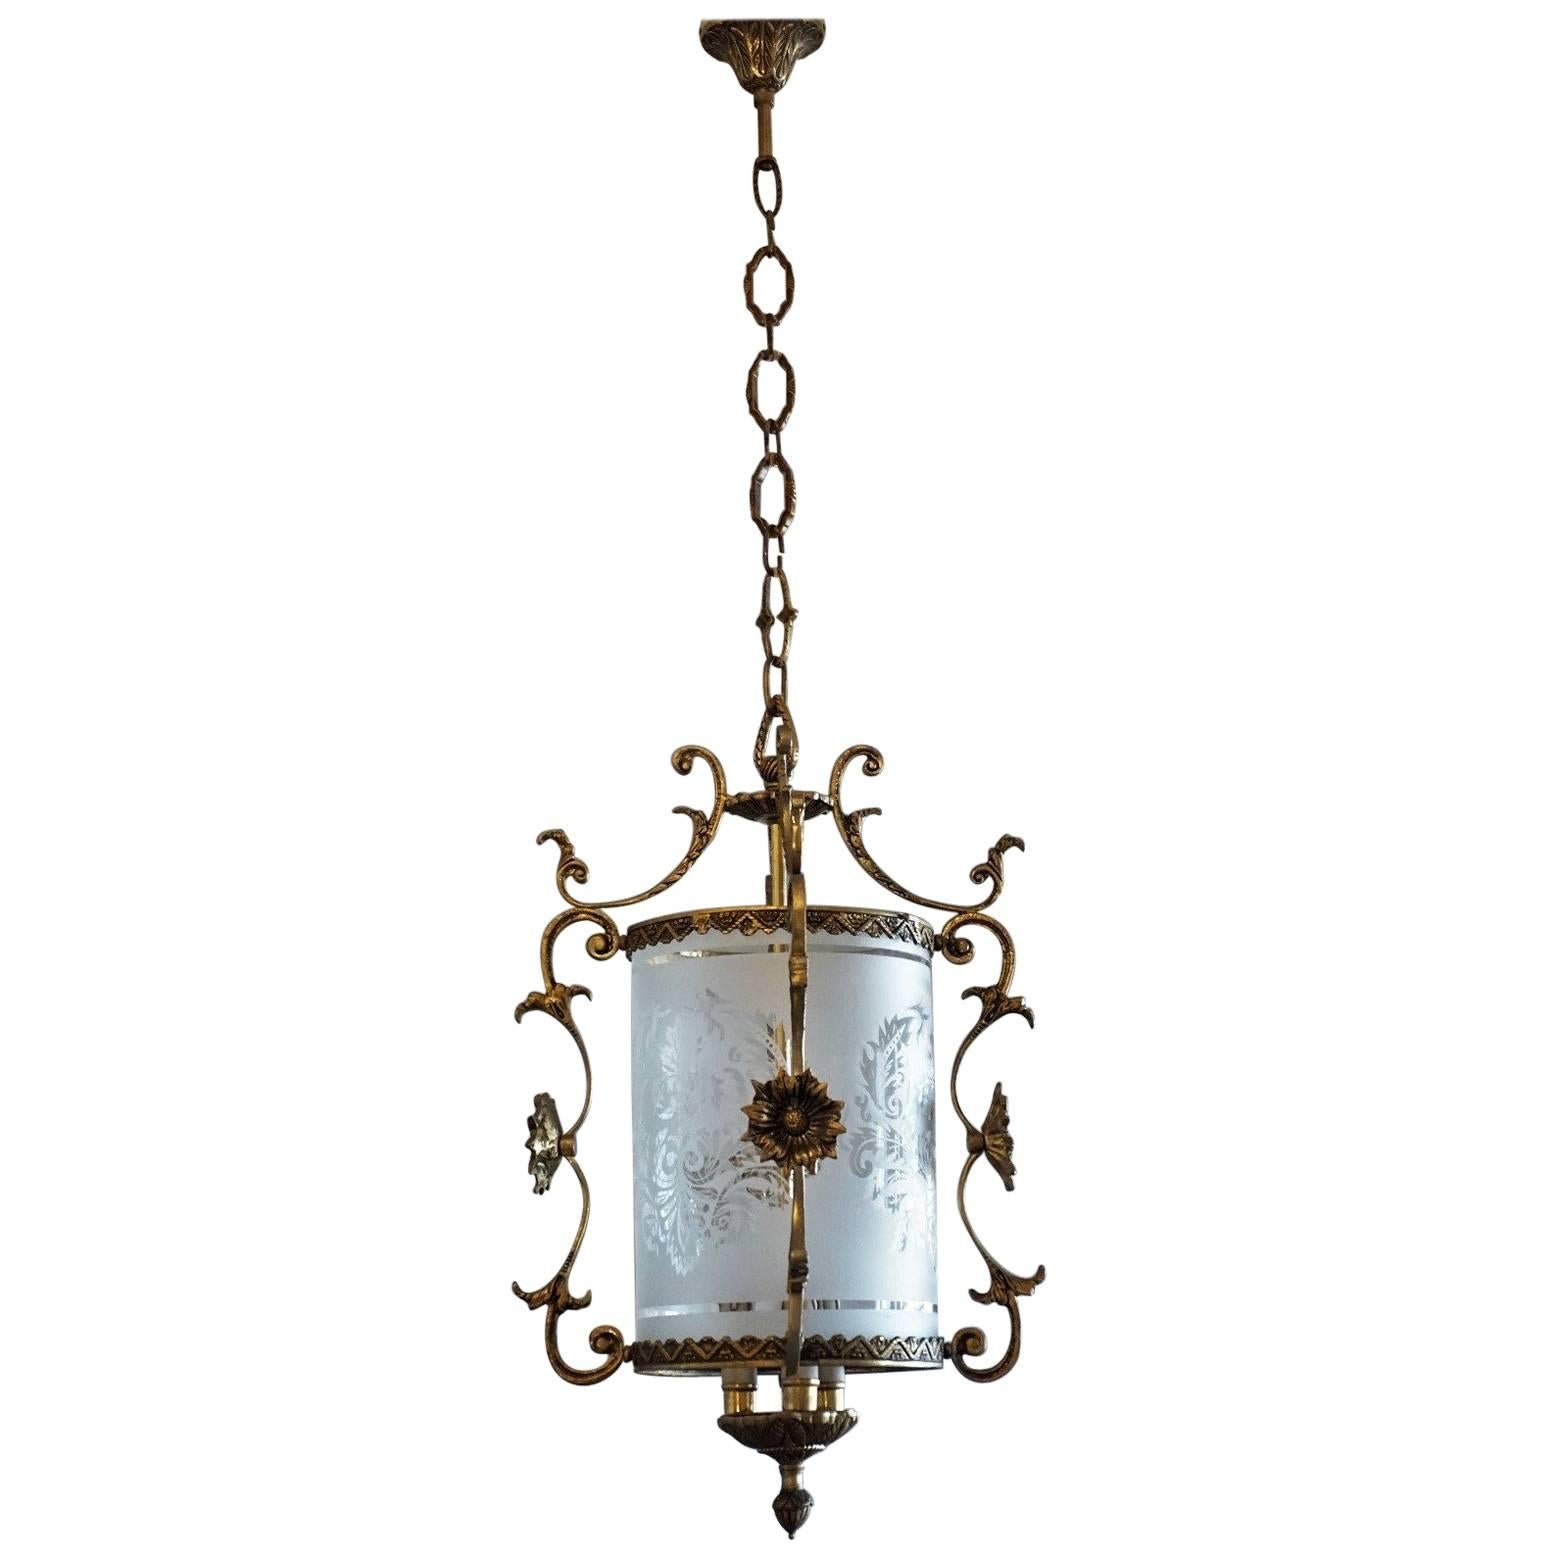 Early 20th century Art Nouveau bronze lantern with etched glass cylinder surrounded by four ornaments decorated with flowers and with integrated central three candle light bulb holder.
Measures: Total height 33 in (83 cm), variable
Height without